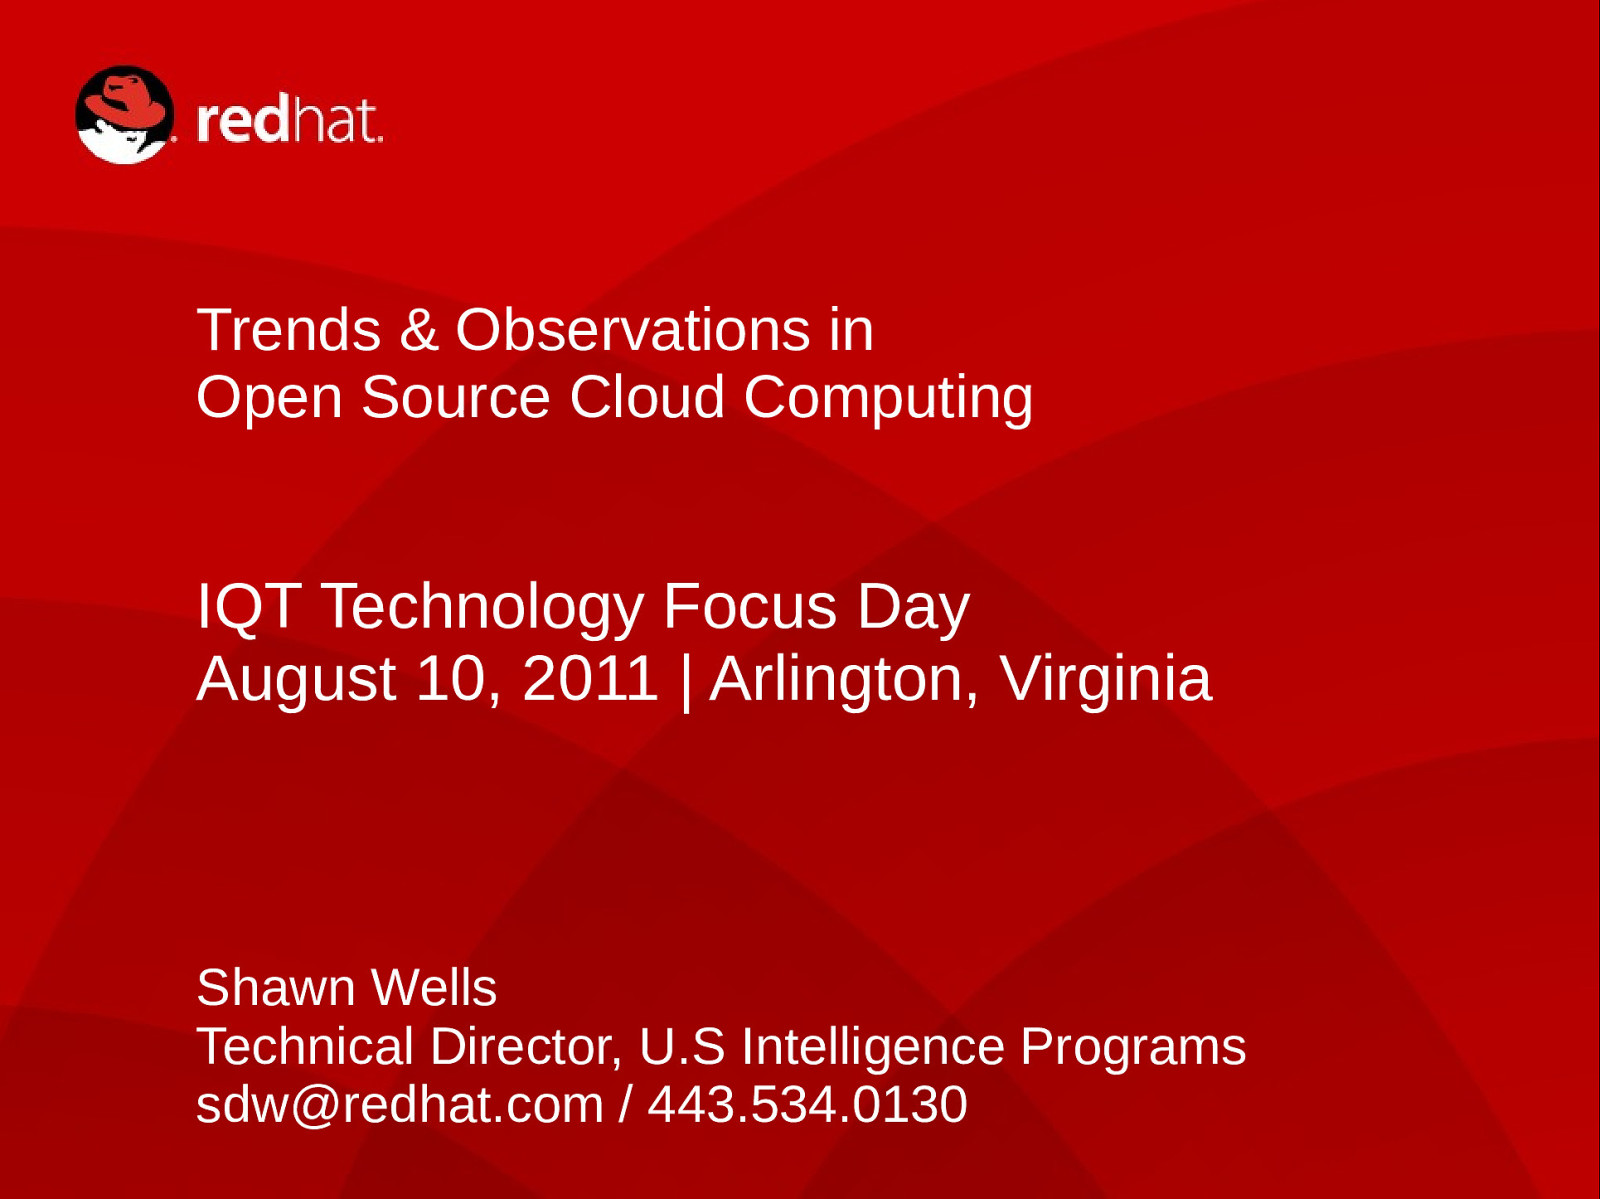 Trends & Observations in Open Source Cloud Computing